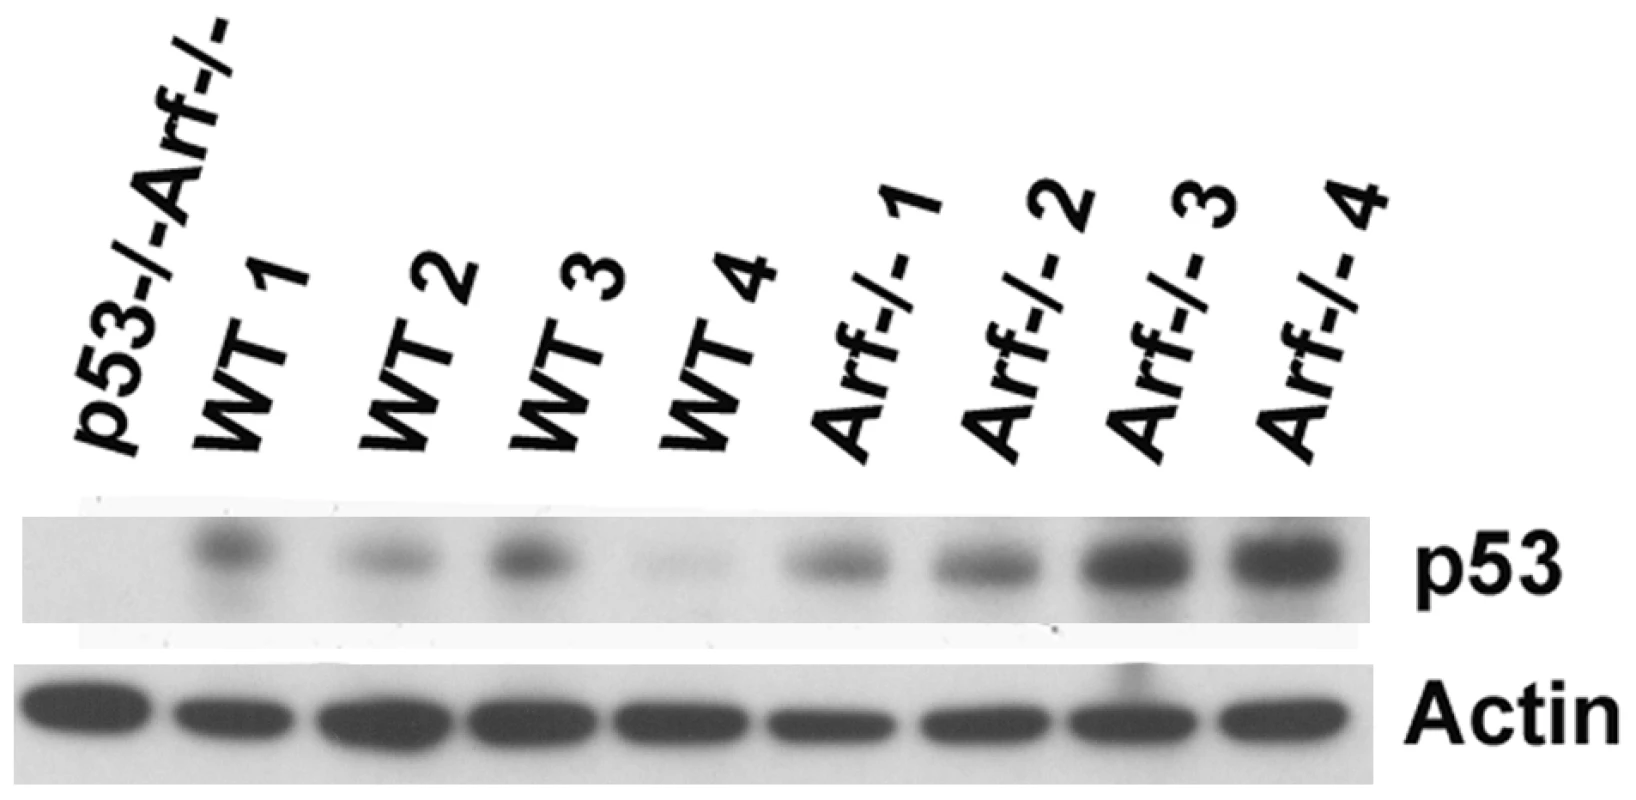 Levels of p53 detected in wild-type and <i>Arf</i>-null testis.